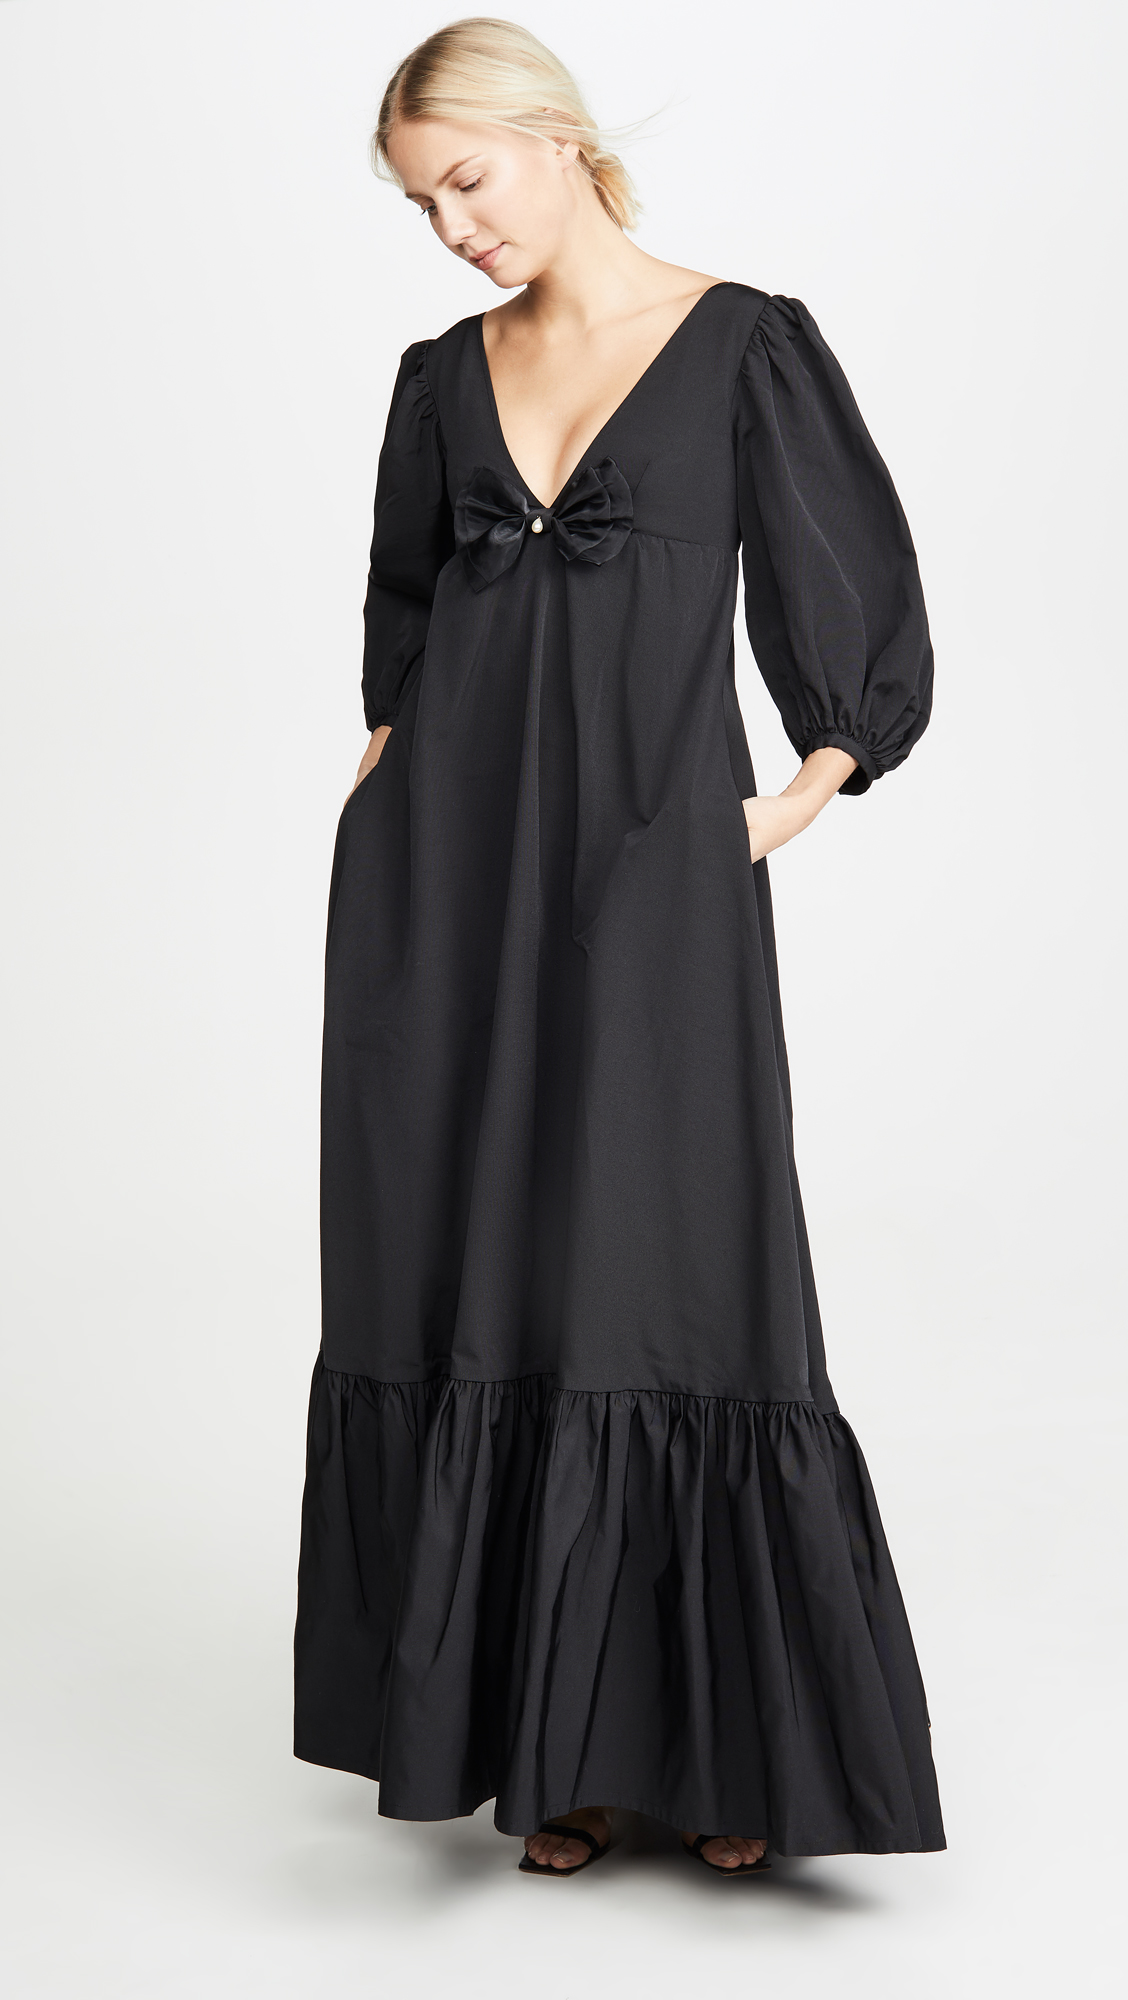 Black Maxi Dress with Bow